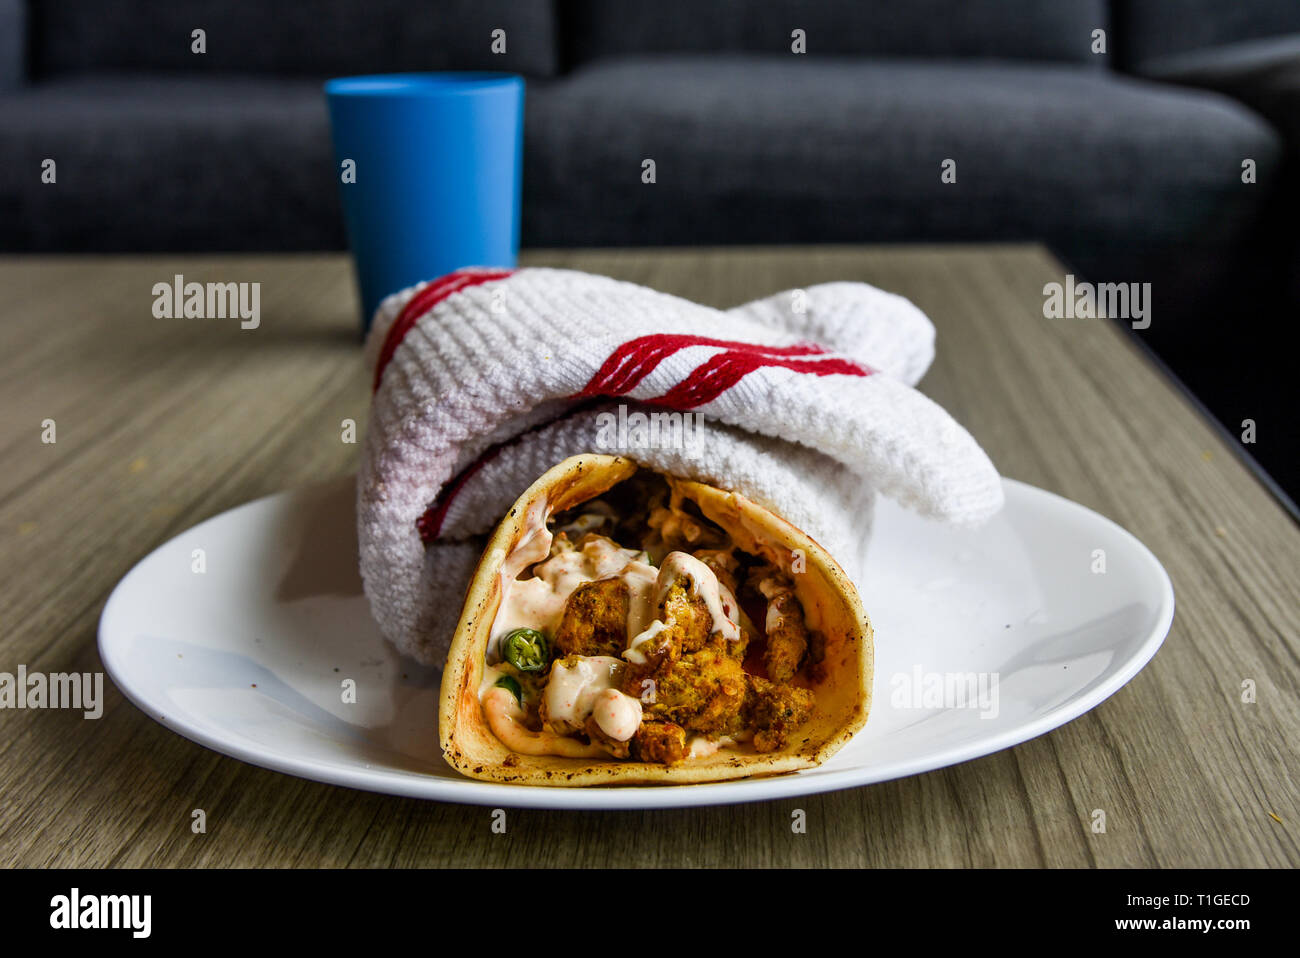 Cloth wrapped sandwich Stock Photo